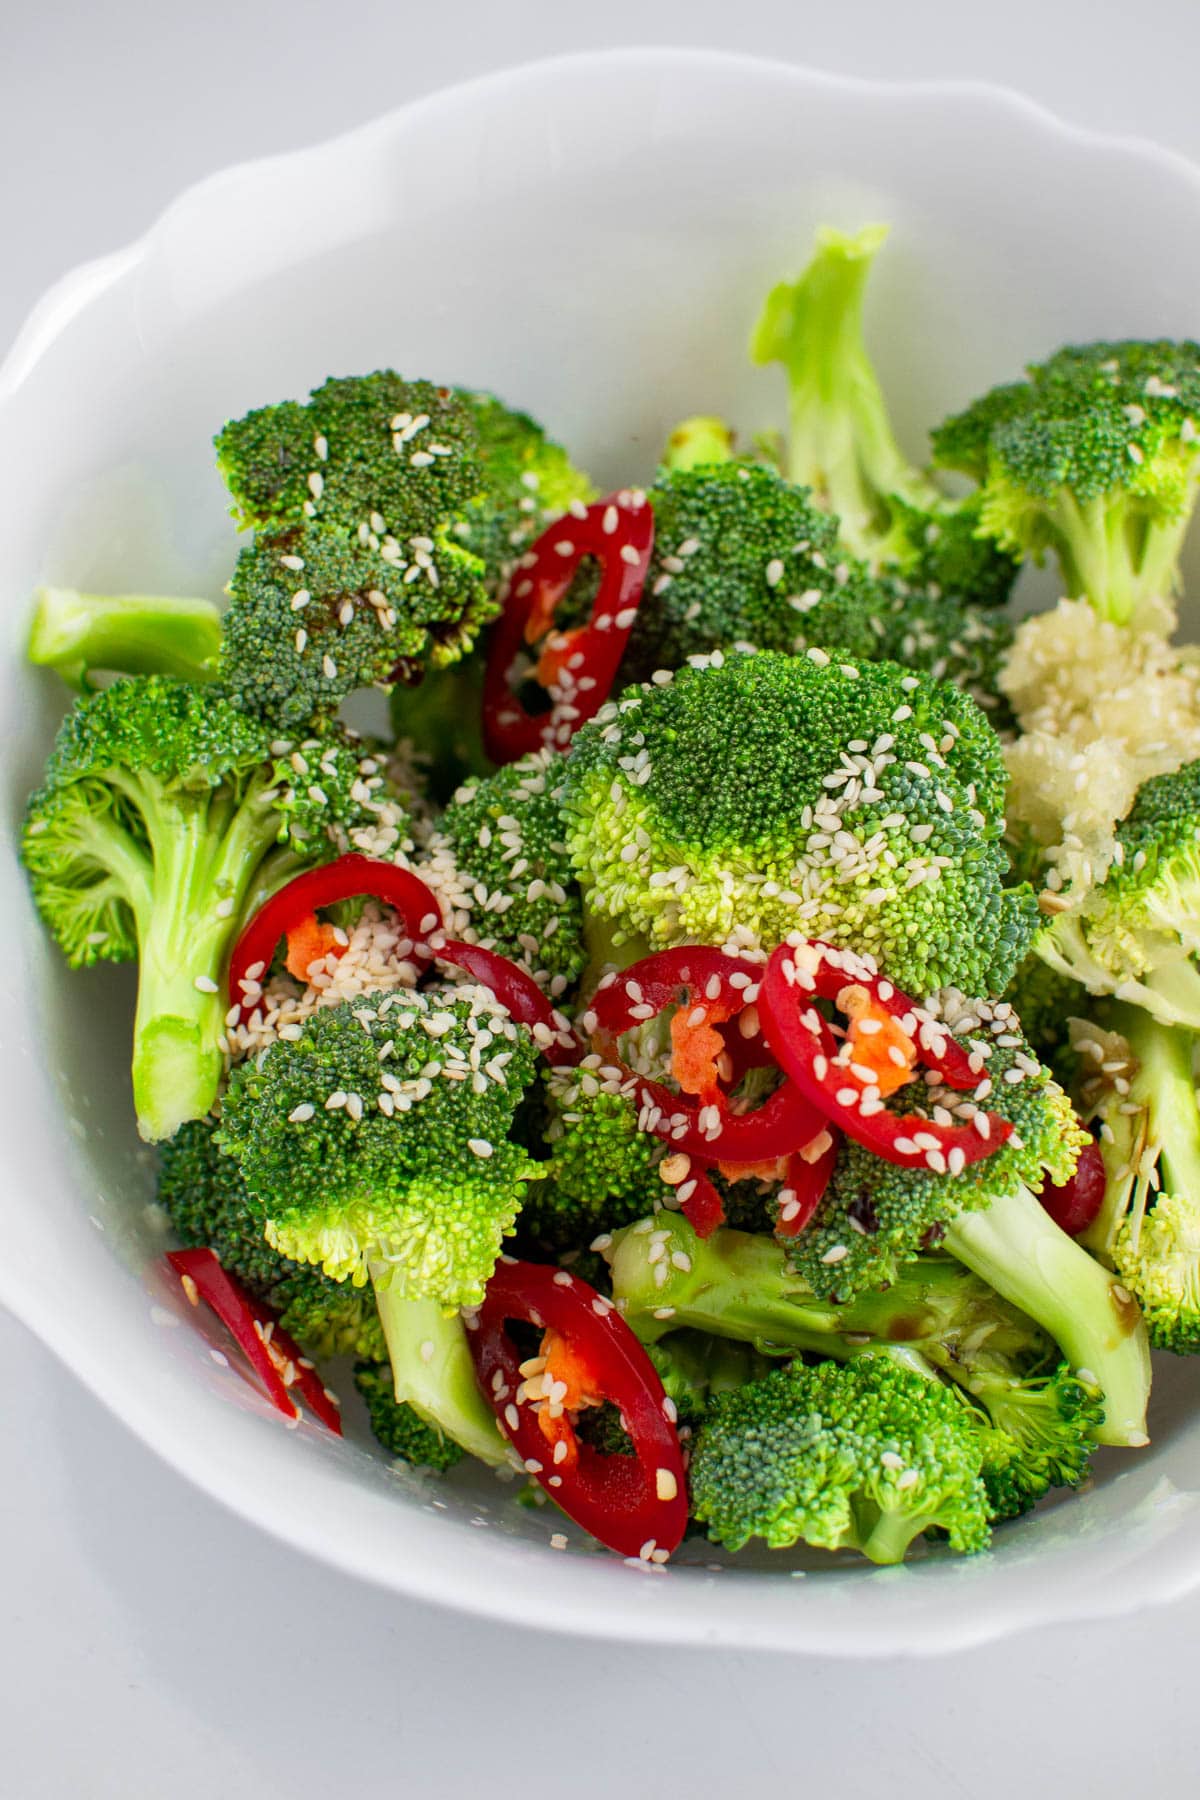 Raw broccoli with sesame seeds and red hot pepper.